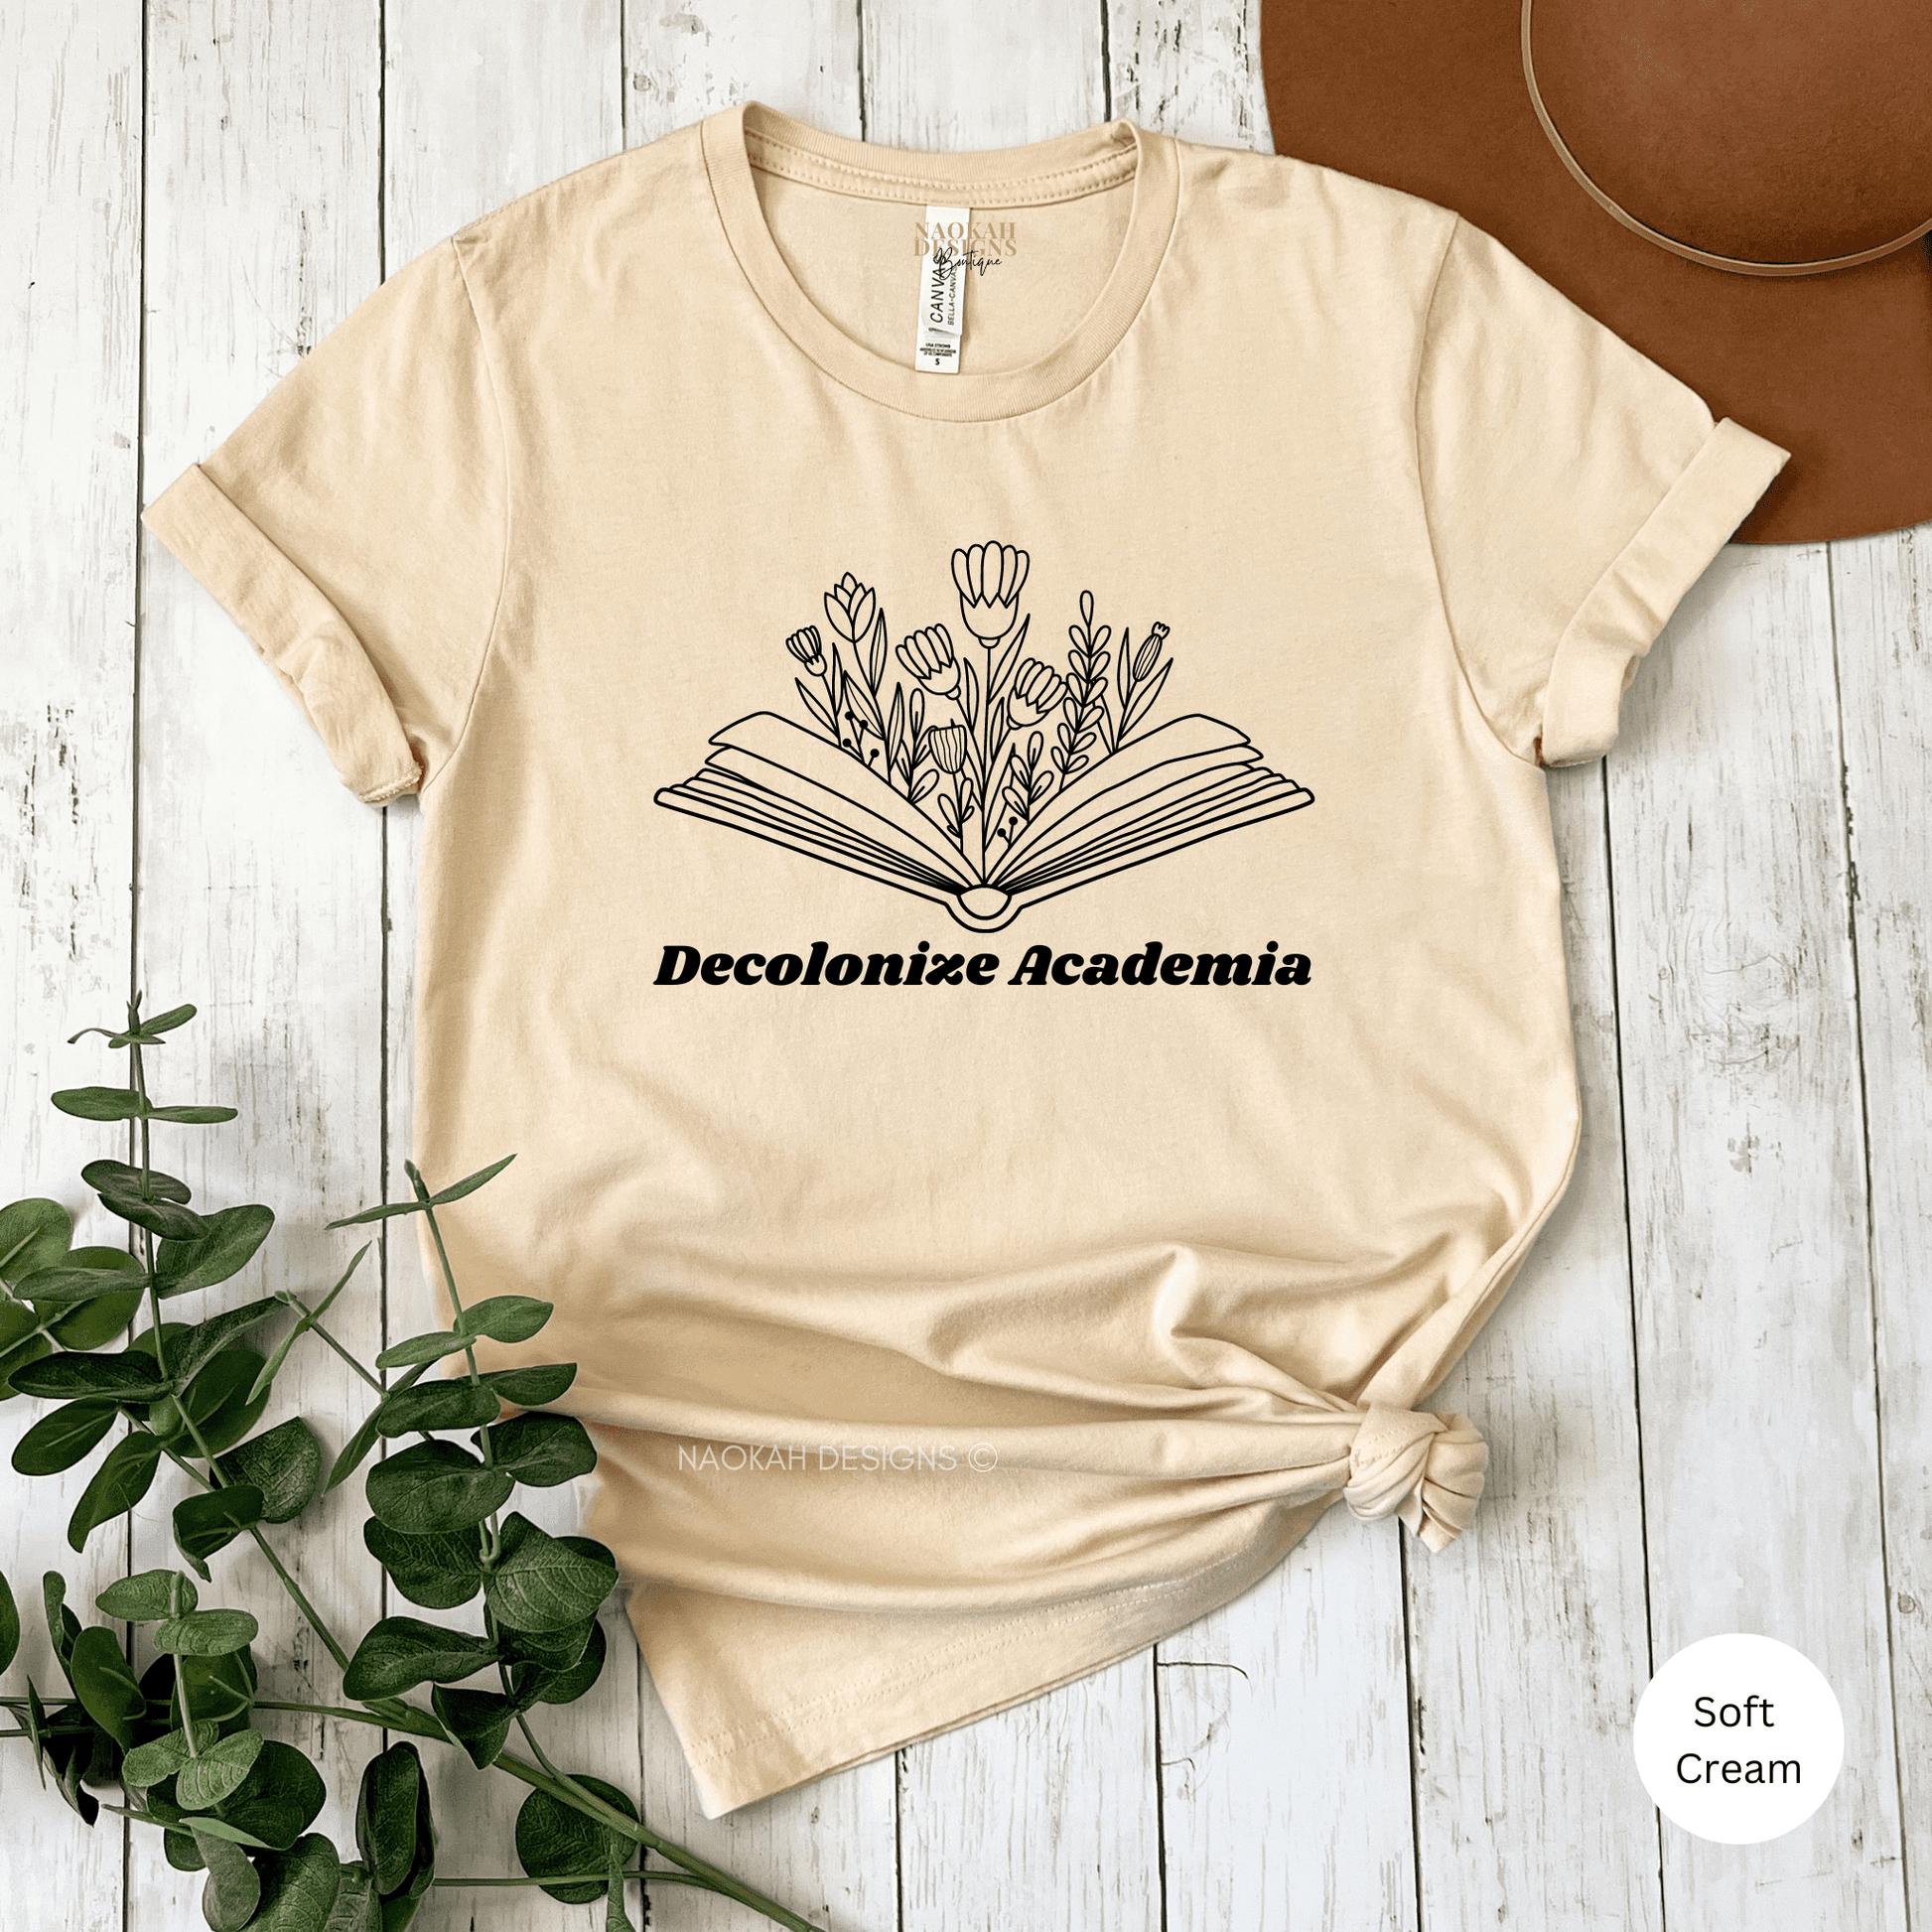 Decolonize Academia Shirt, Decolonize Shirt, Ancestral Teaching, Indigenous, Native Pride, You are on Native Land, You are on Indigenous Land, Colonialism, Native Teaching, Indigenous Owned, Anti racist, Anti Colonialism, Native American Shirt, Social Justice Shirt, No one is illegal, MMIW, decolonize anthropology, dismantle systems of oppression